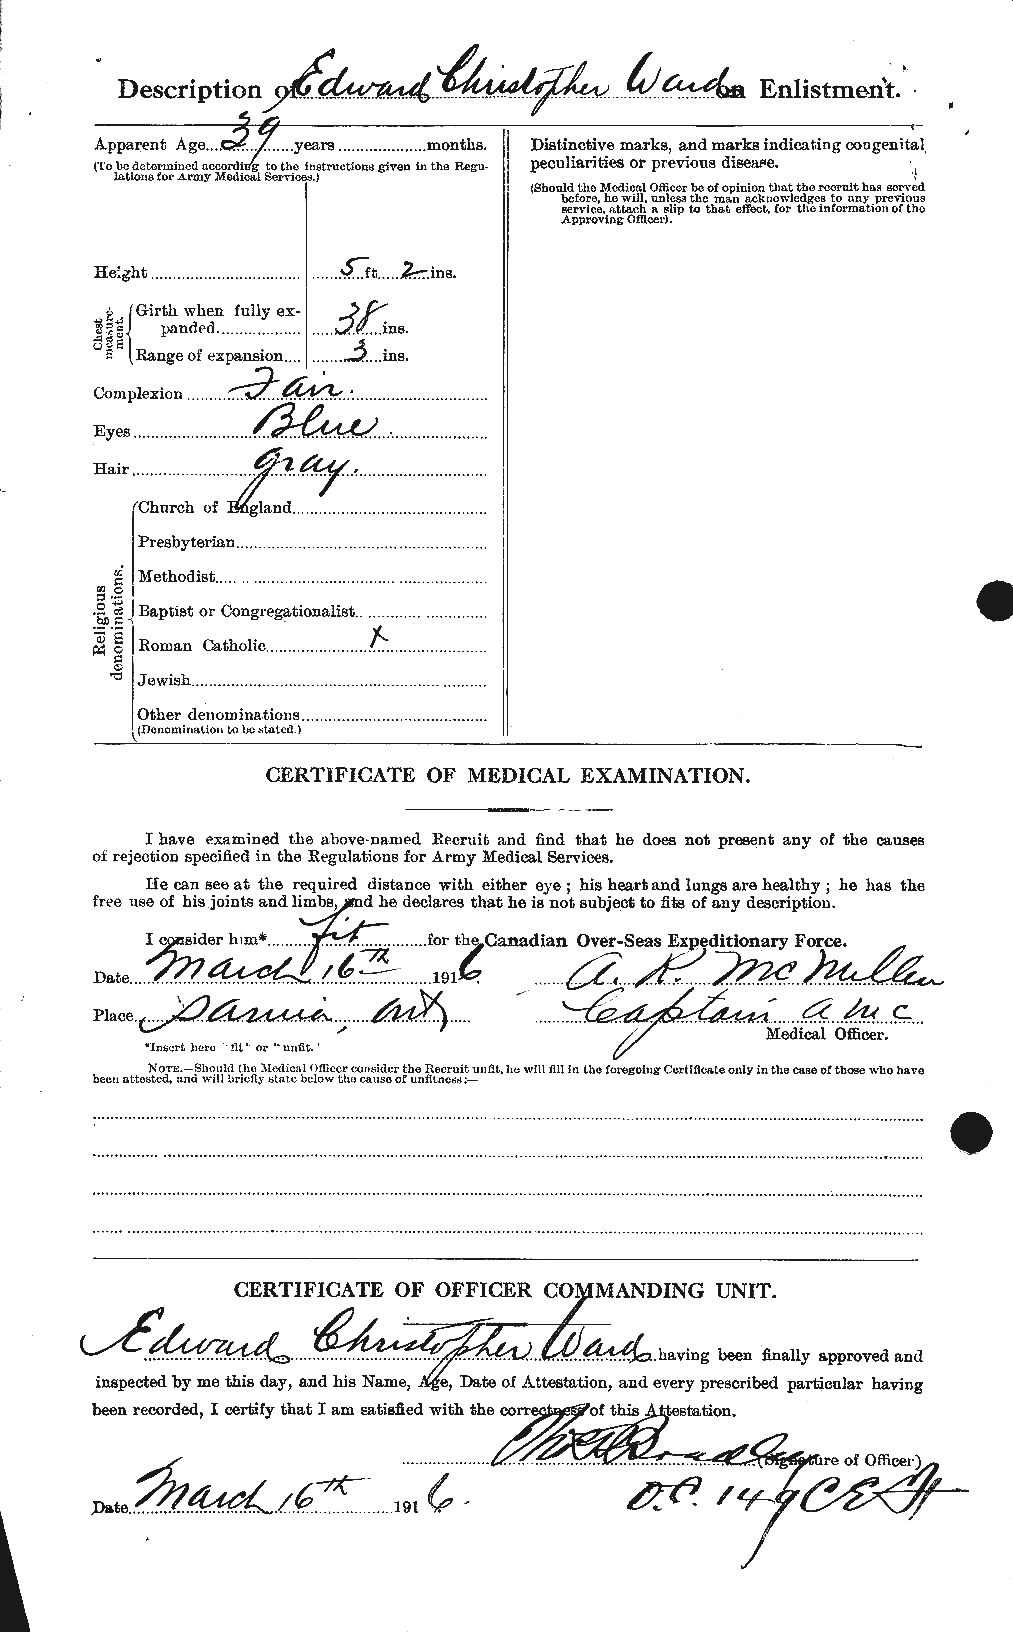 Personnel Records of the First World War - CEF 657649b